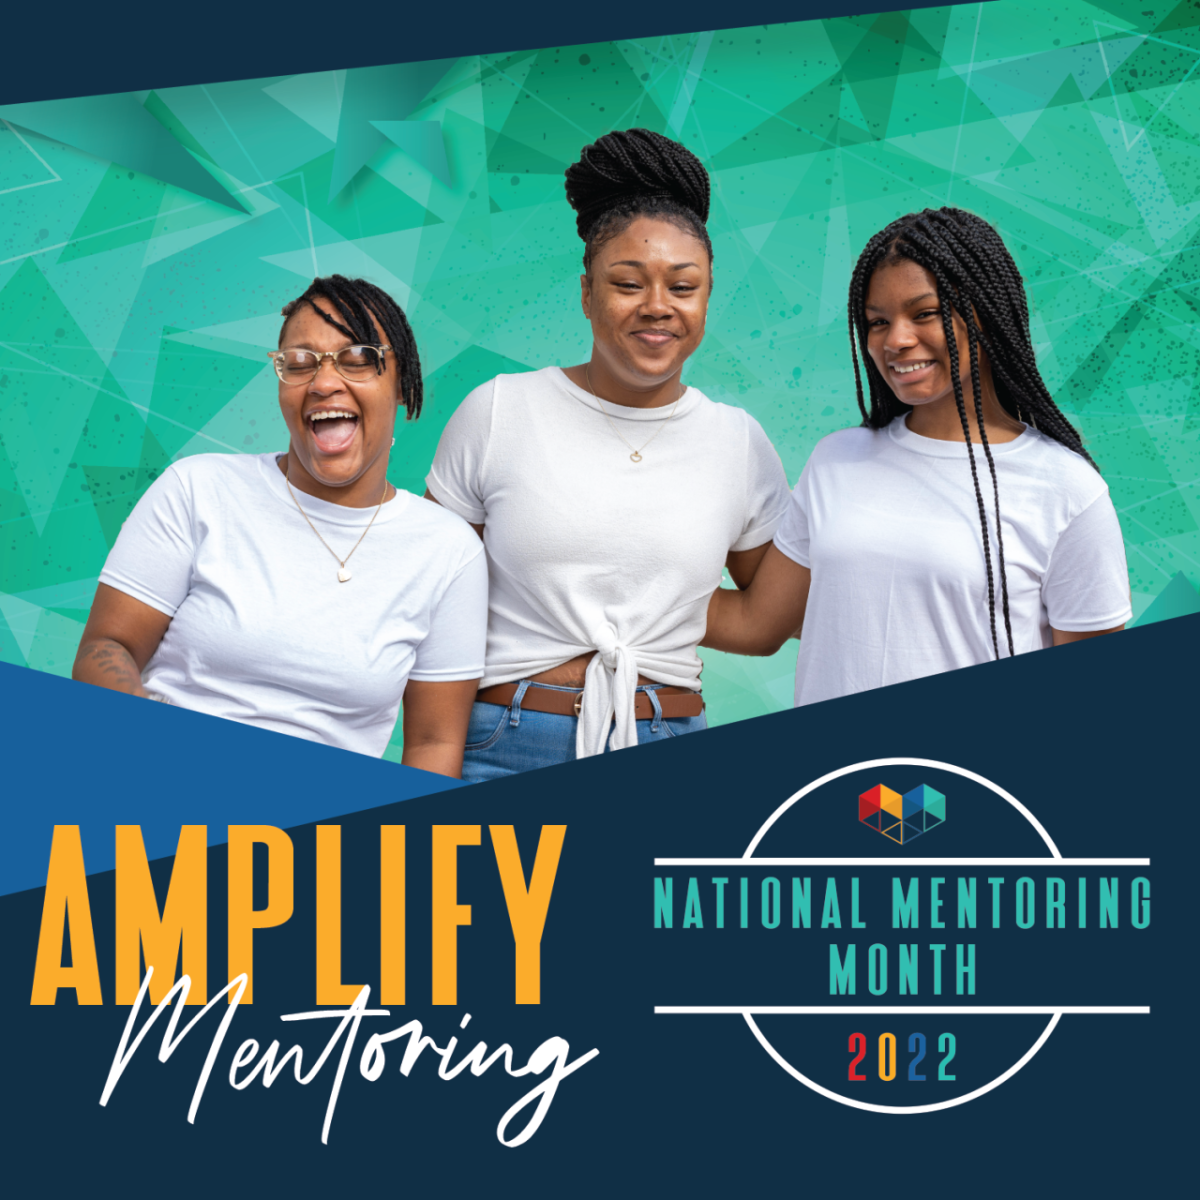 Three teenage girls laughing with the words Amplify Mentoring and National Mentoring Month 2022